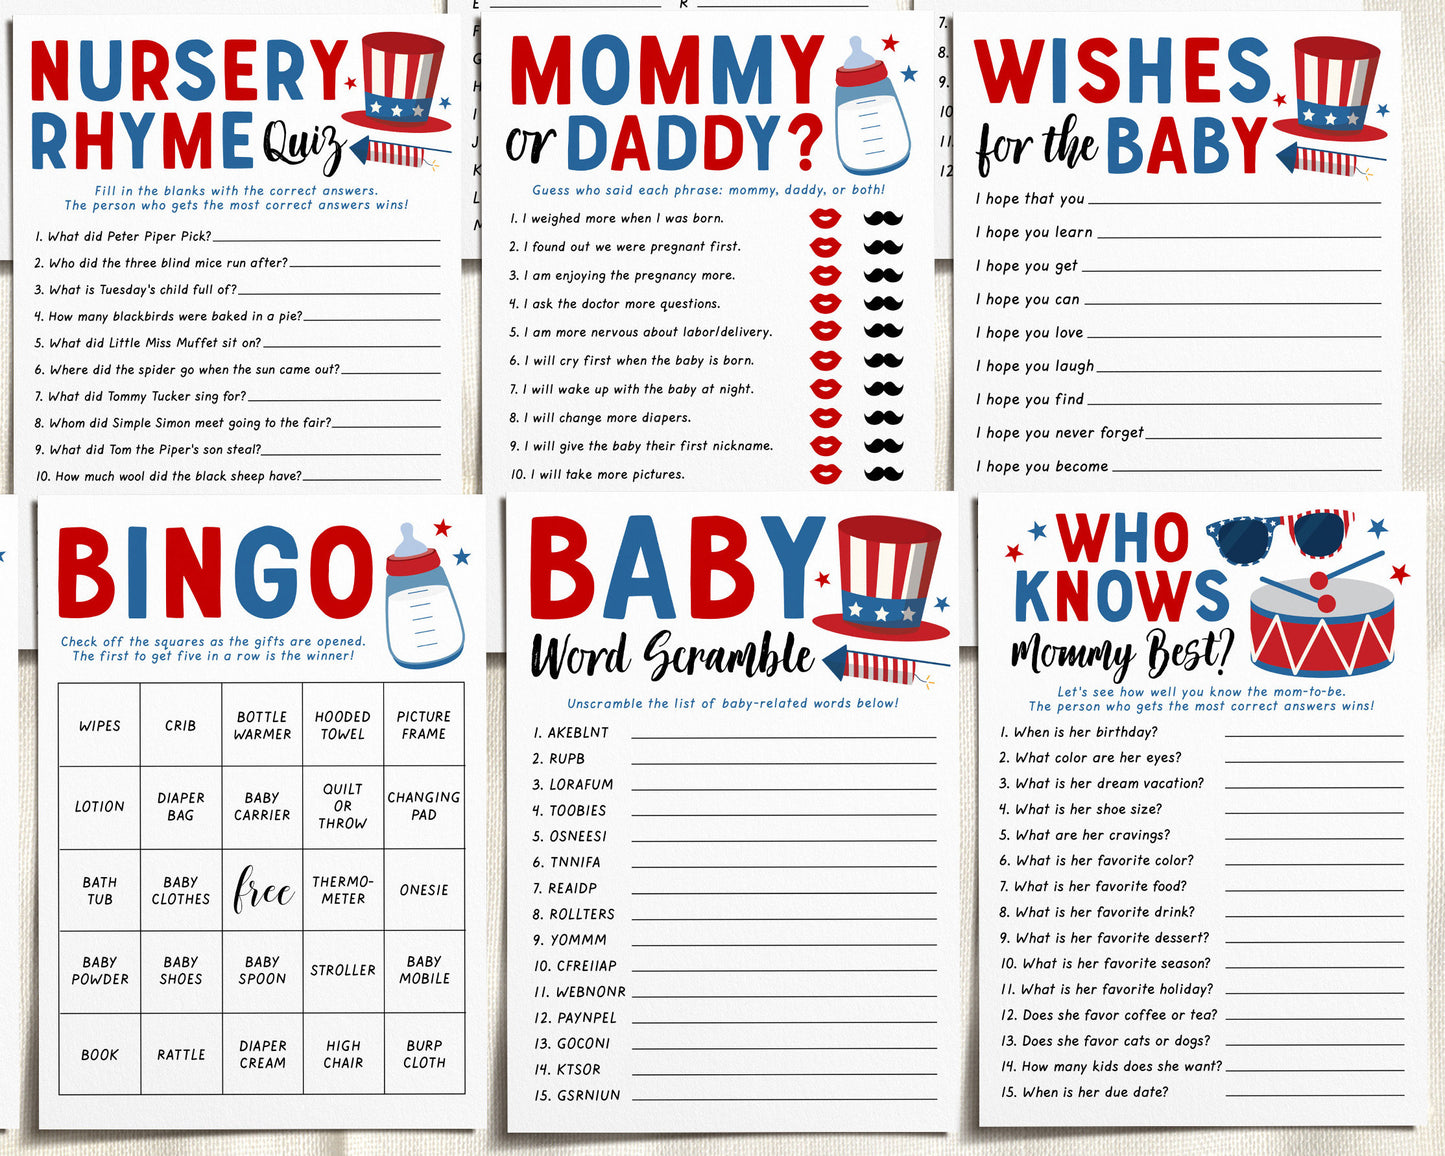 4th of July Baby Shower Games Bundle Editable Template, Red White and Due 12 Shower Games, Summer Word Scramble, What's On Your Phone